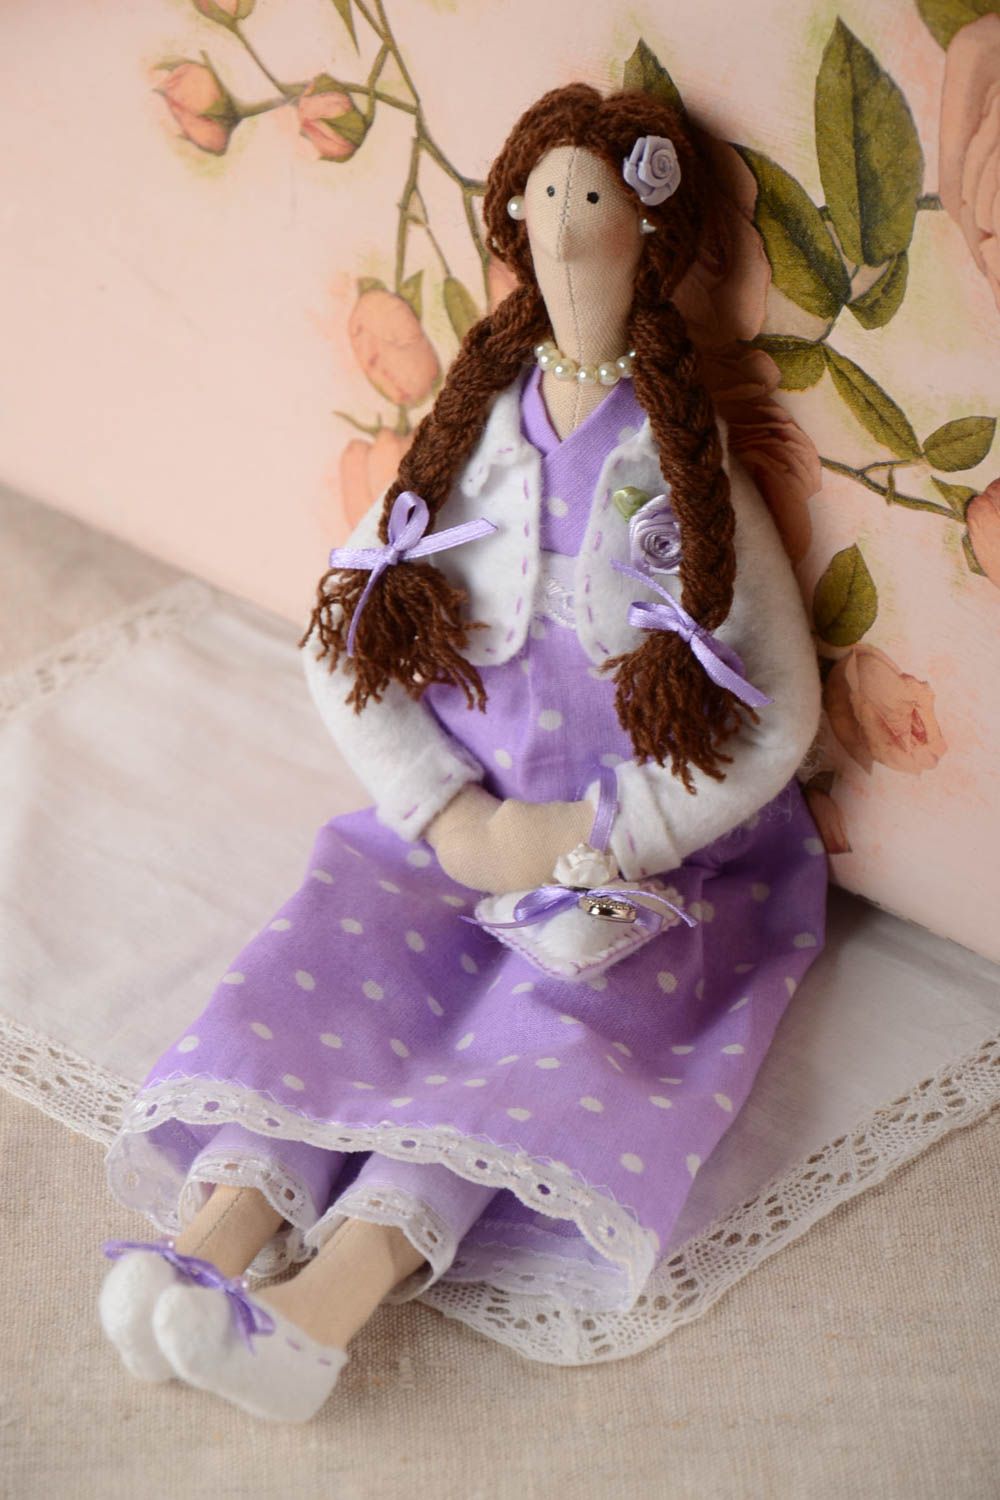 Beautiful handmade fabric soft toy collectible rag doll unusual gift ideas photo 1